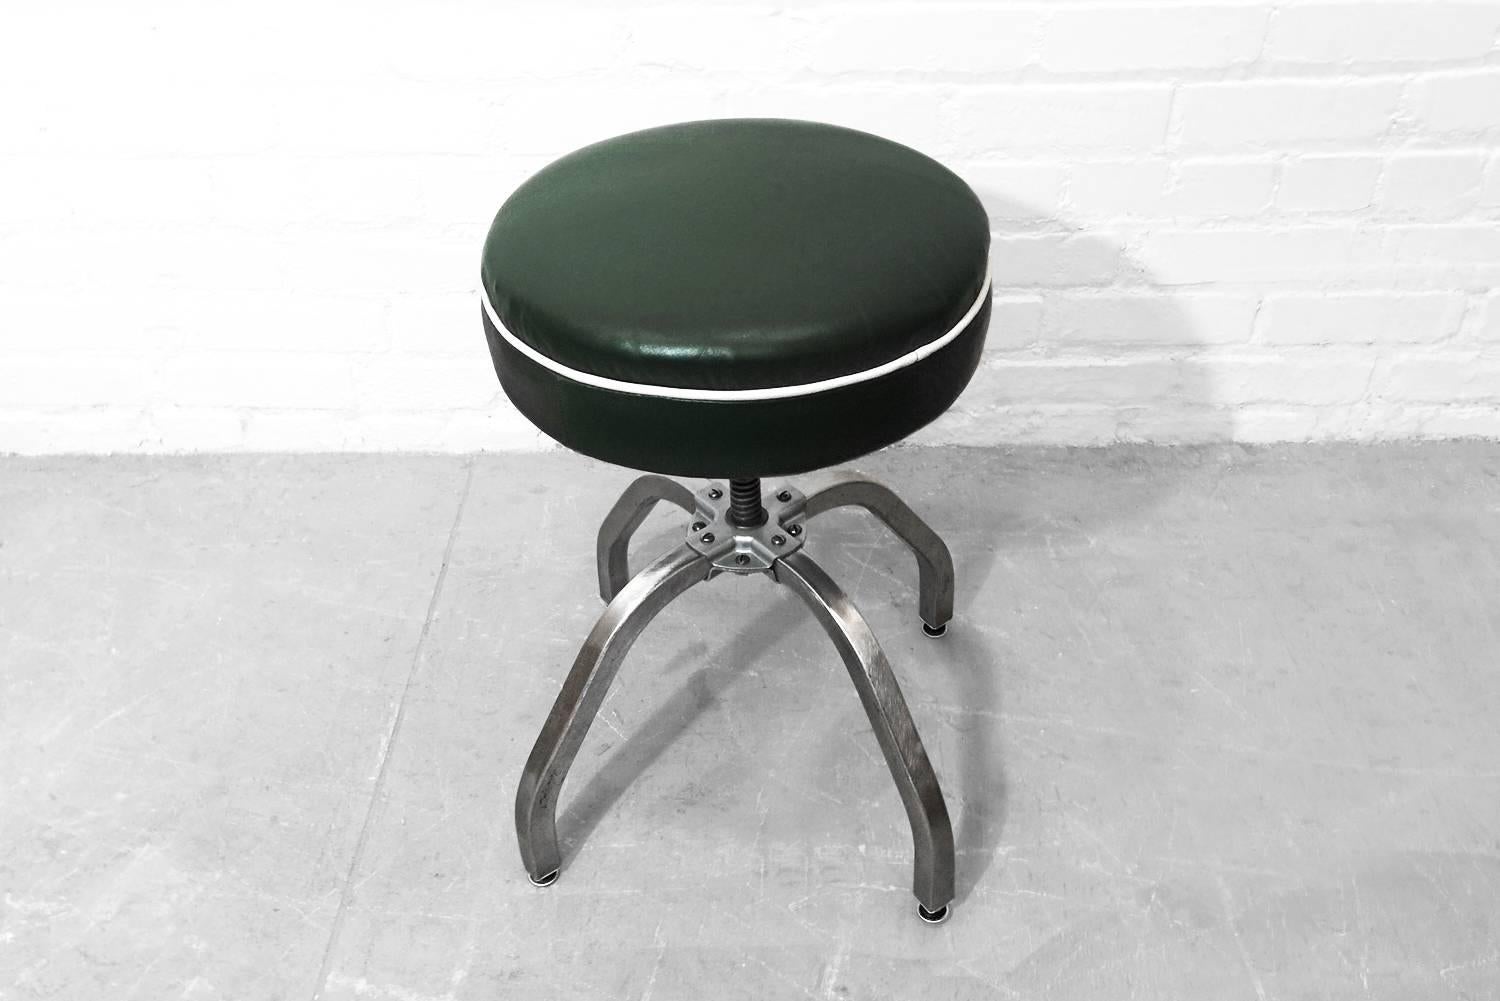 Machine Age Pair of Rare Buty-Crafters Salon Stools, circa 1940s